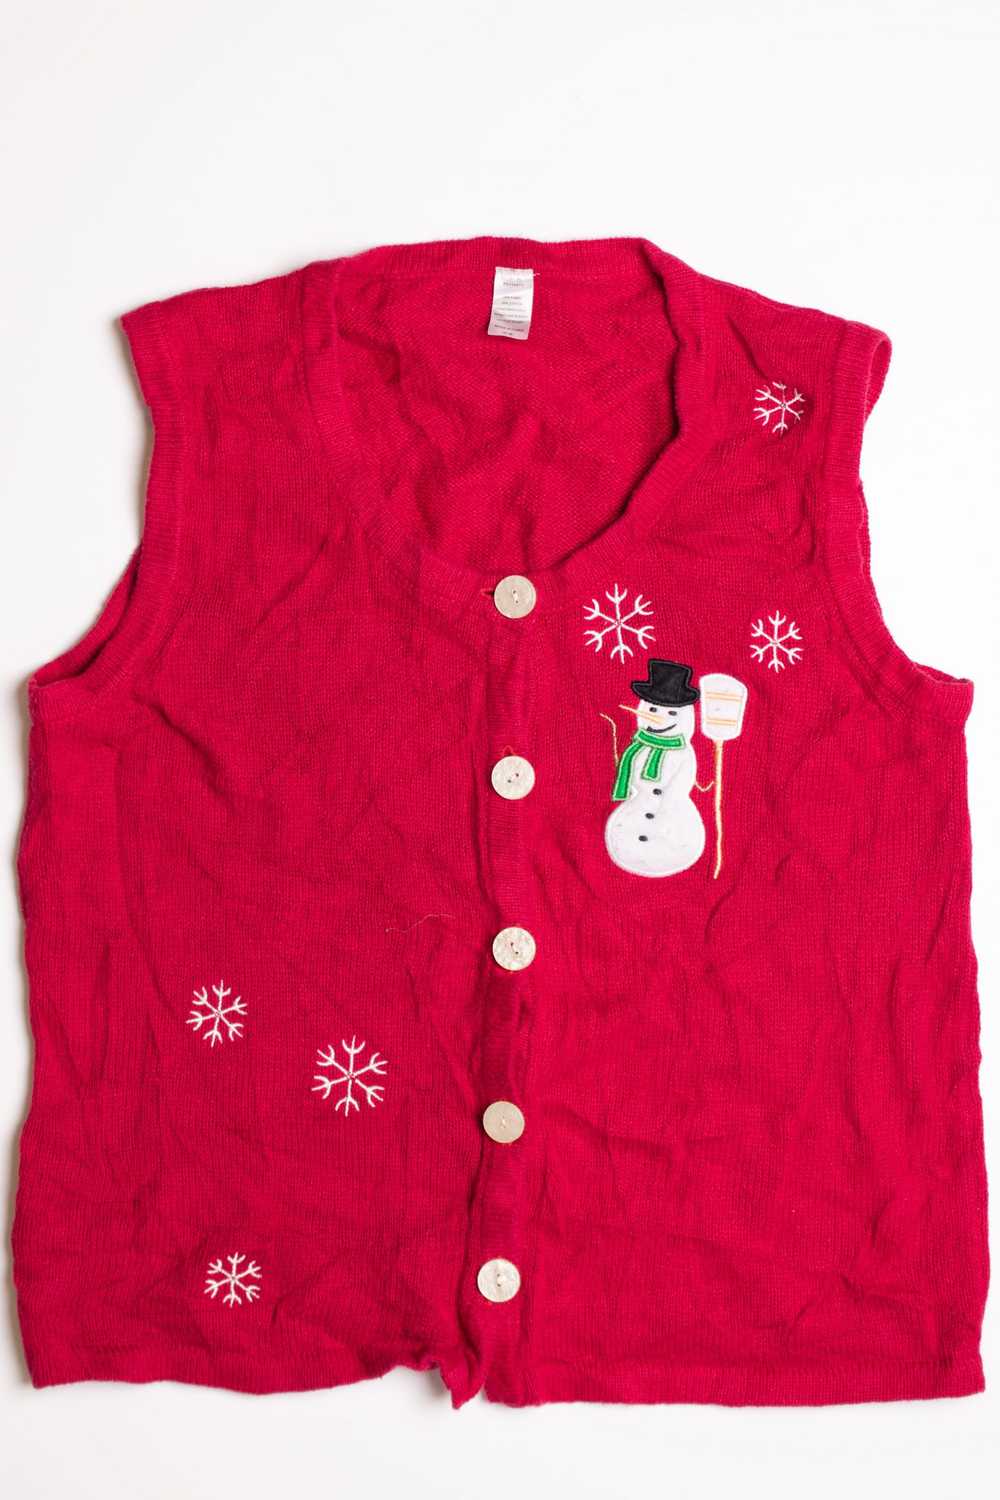 Ugly Christmas Sweater Vest 35 - image 2